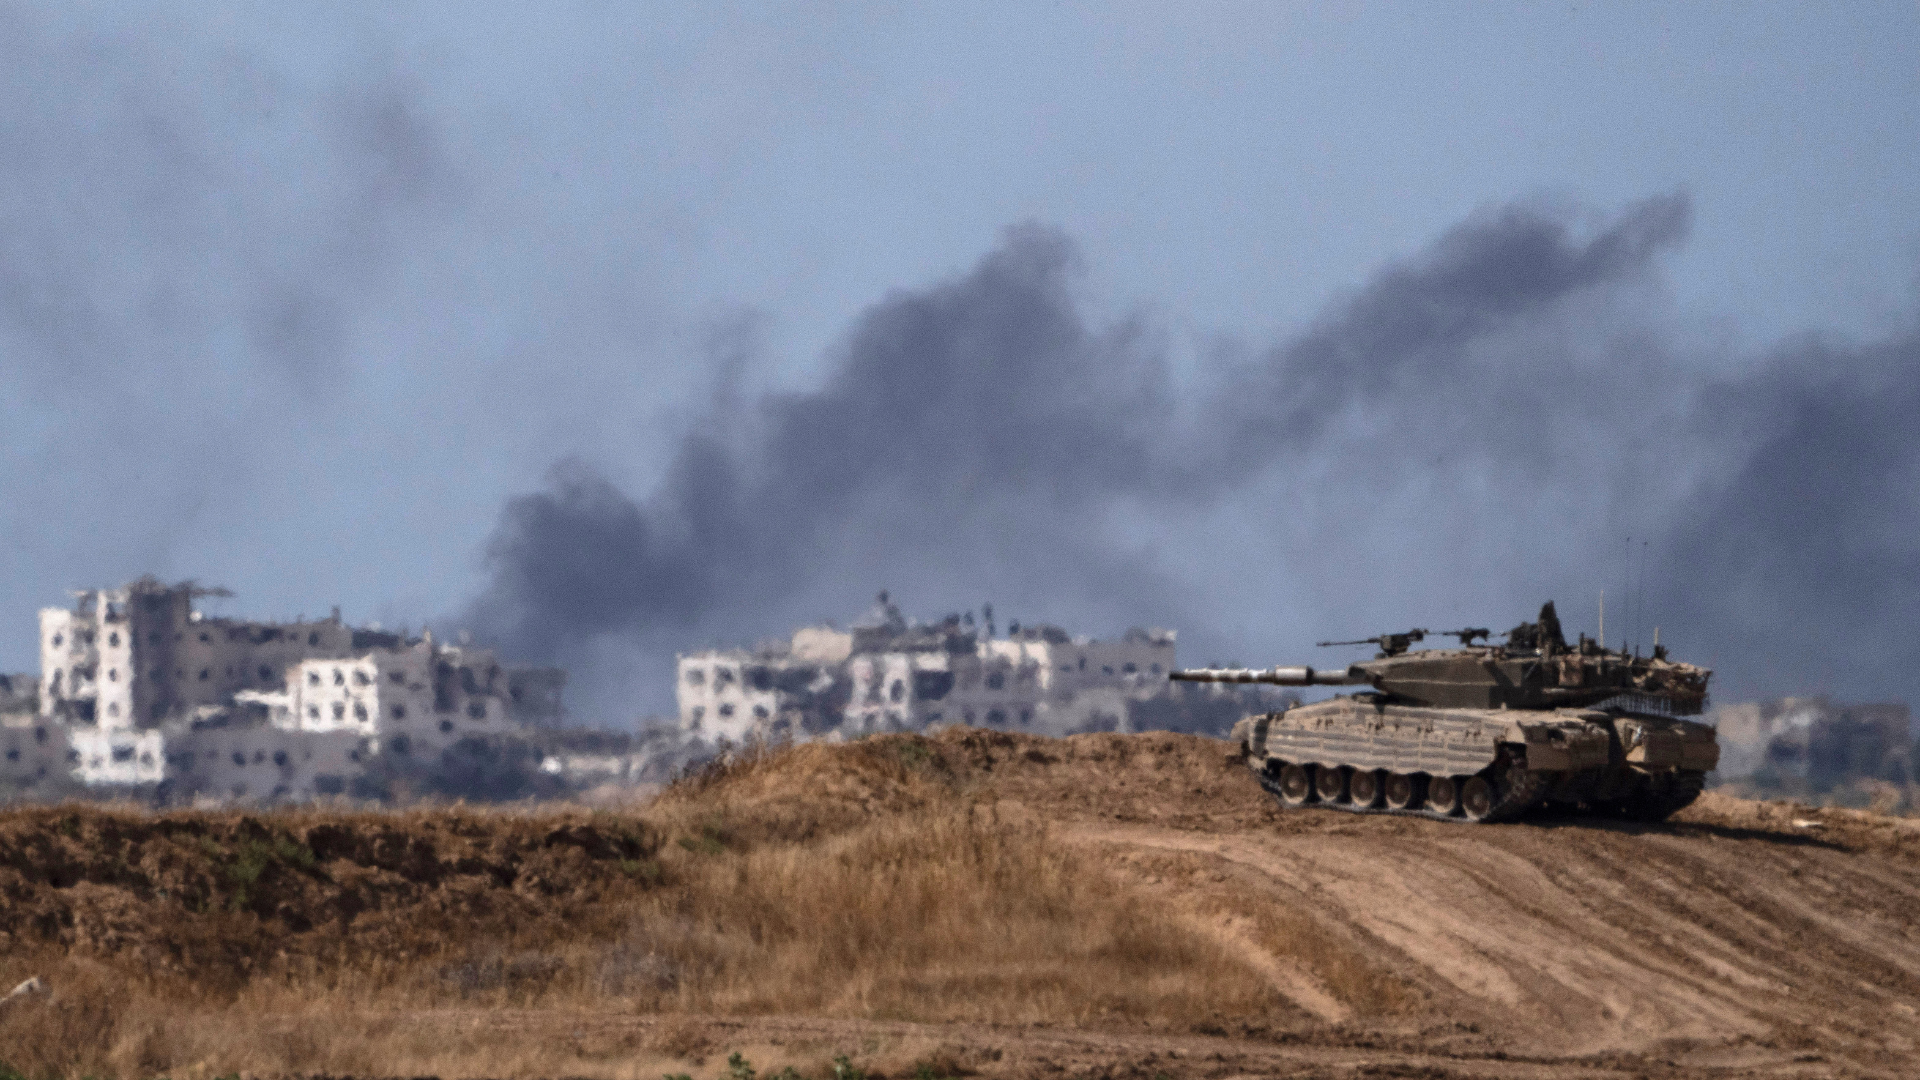 Smoke rising to the sky after an explosion in the Gaza Strip, as an Israeli tank stands near the Israel-Gaza border as seen from southern Israel. /AP /Leo Correa